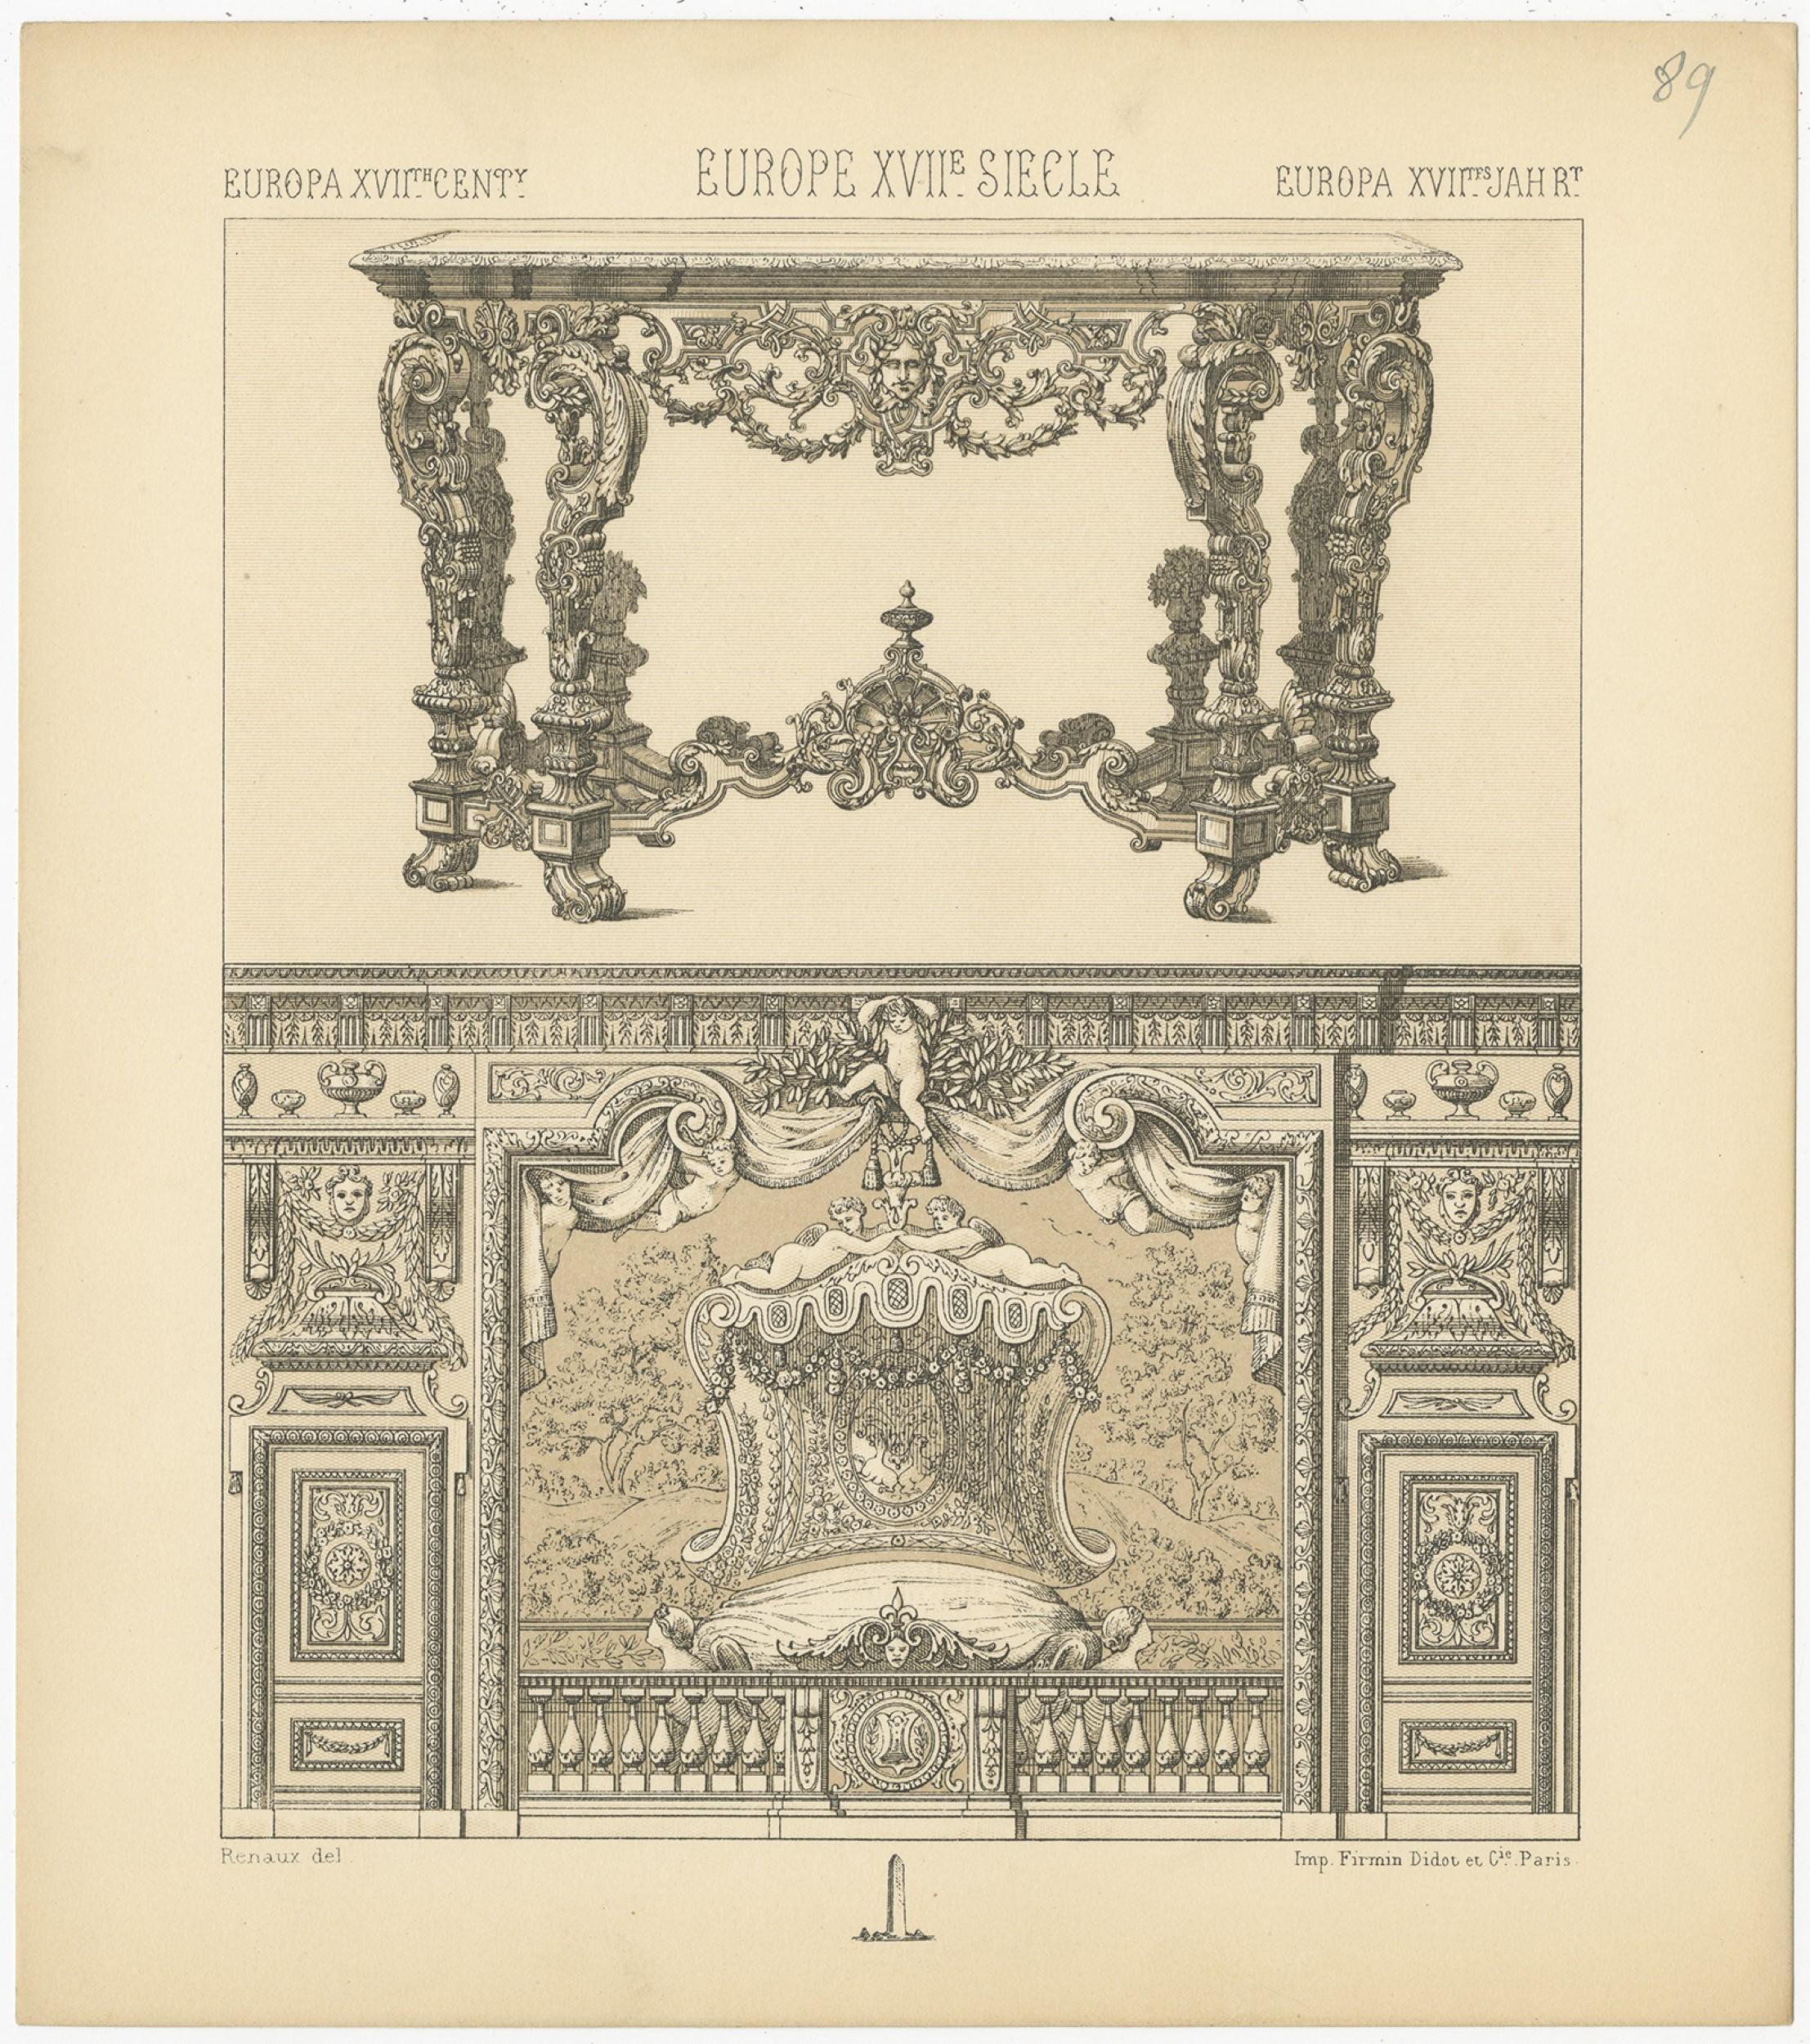 Antique print titled 'Europa XVIIth Cent - Europe XVIIe Siecle - Europa XVIItes Jahr'. Chromolithograph of European 17th century furniture . This print originates from 'Le Costume Historique' by M.A. Racinet. Published circa 1880.